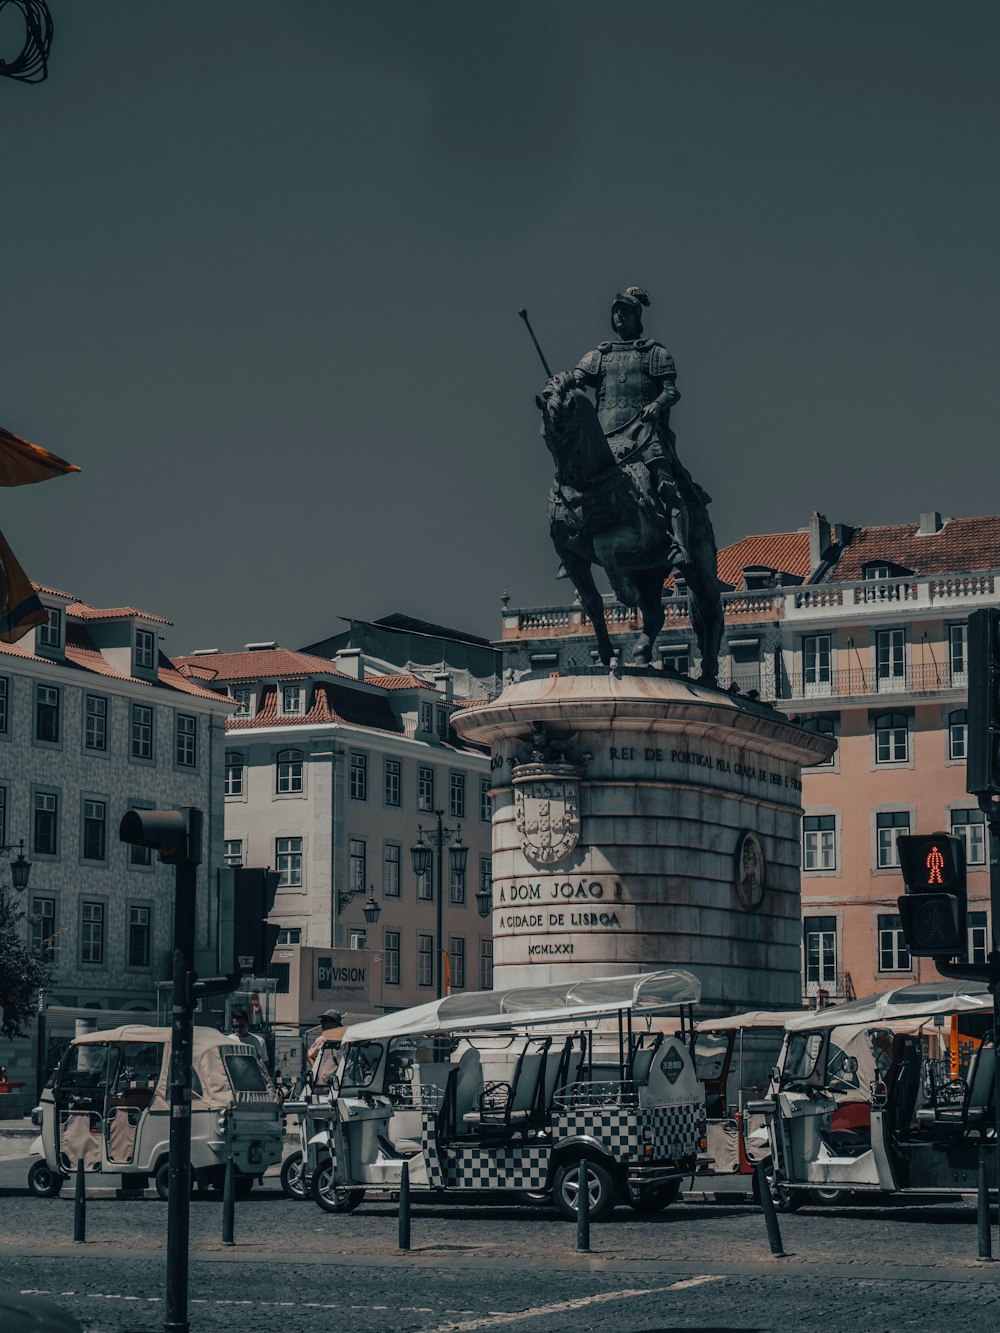 a statue of a man on a horse in the middle of a city